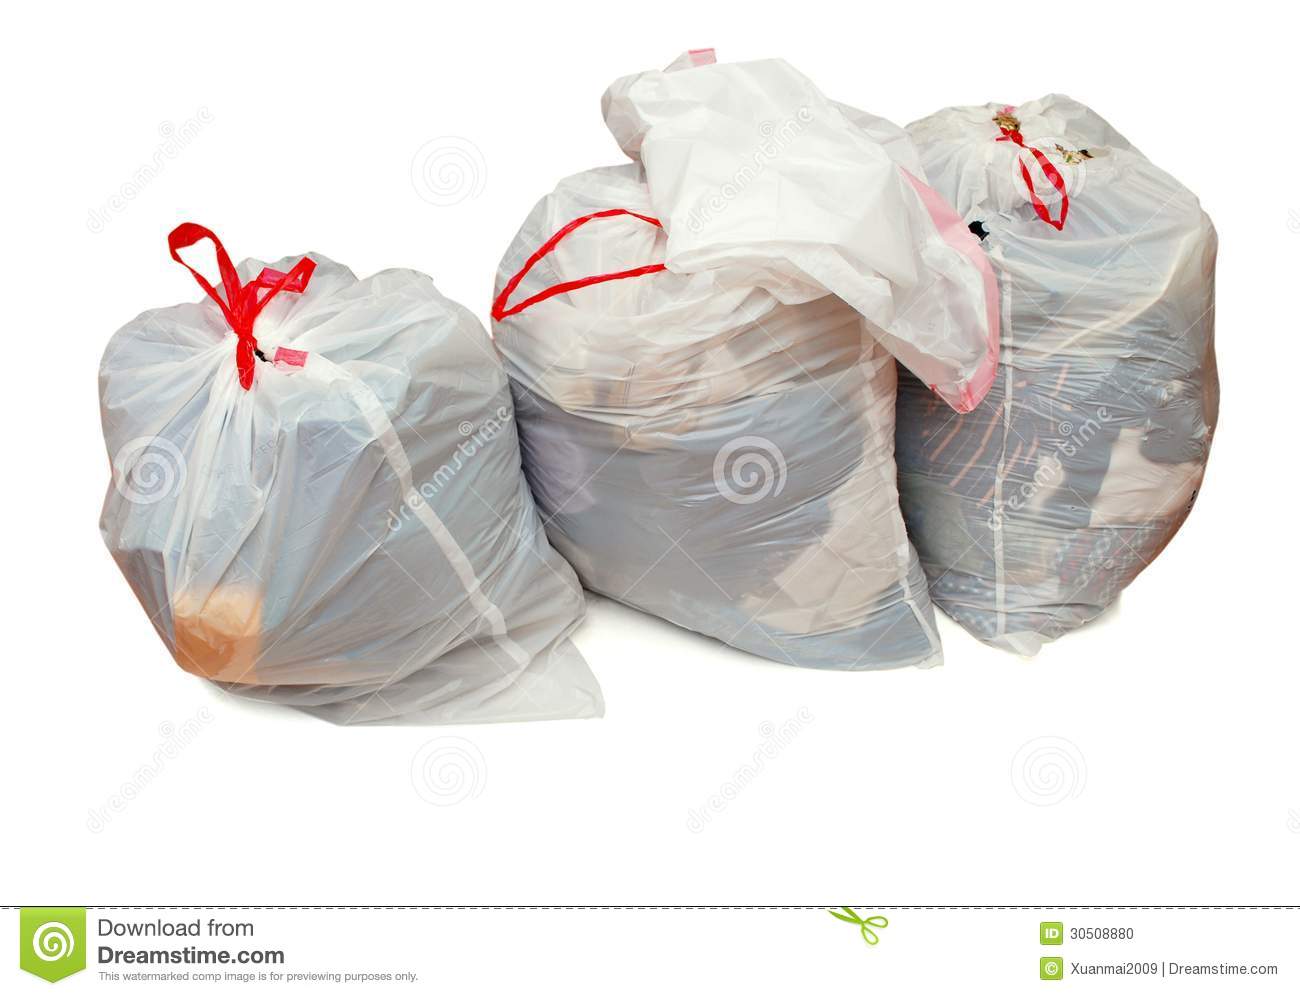 Donation Bags With Clothing Stock Photo   Image  30508880